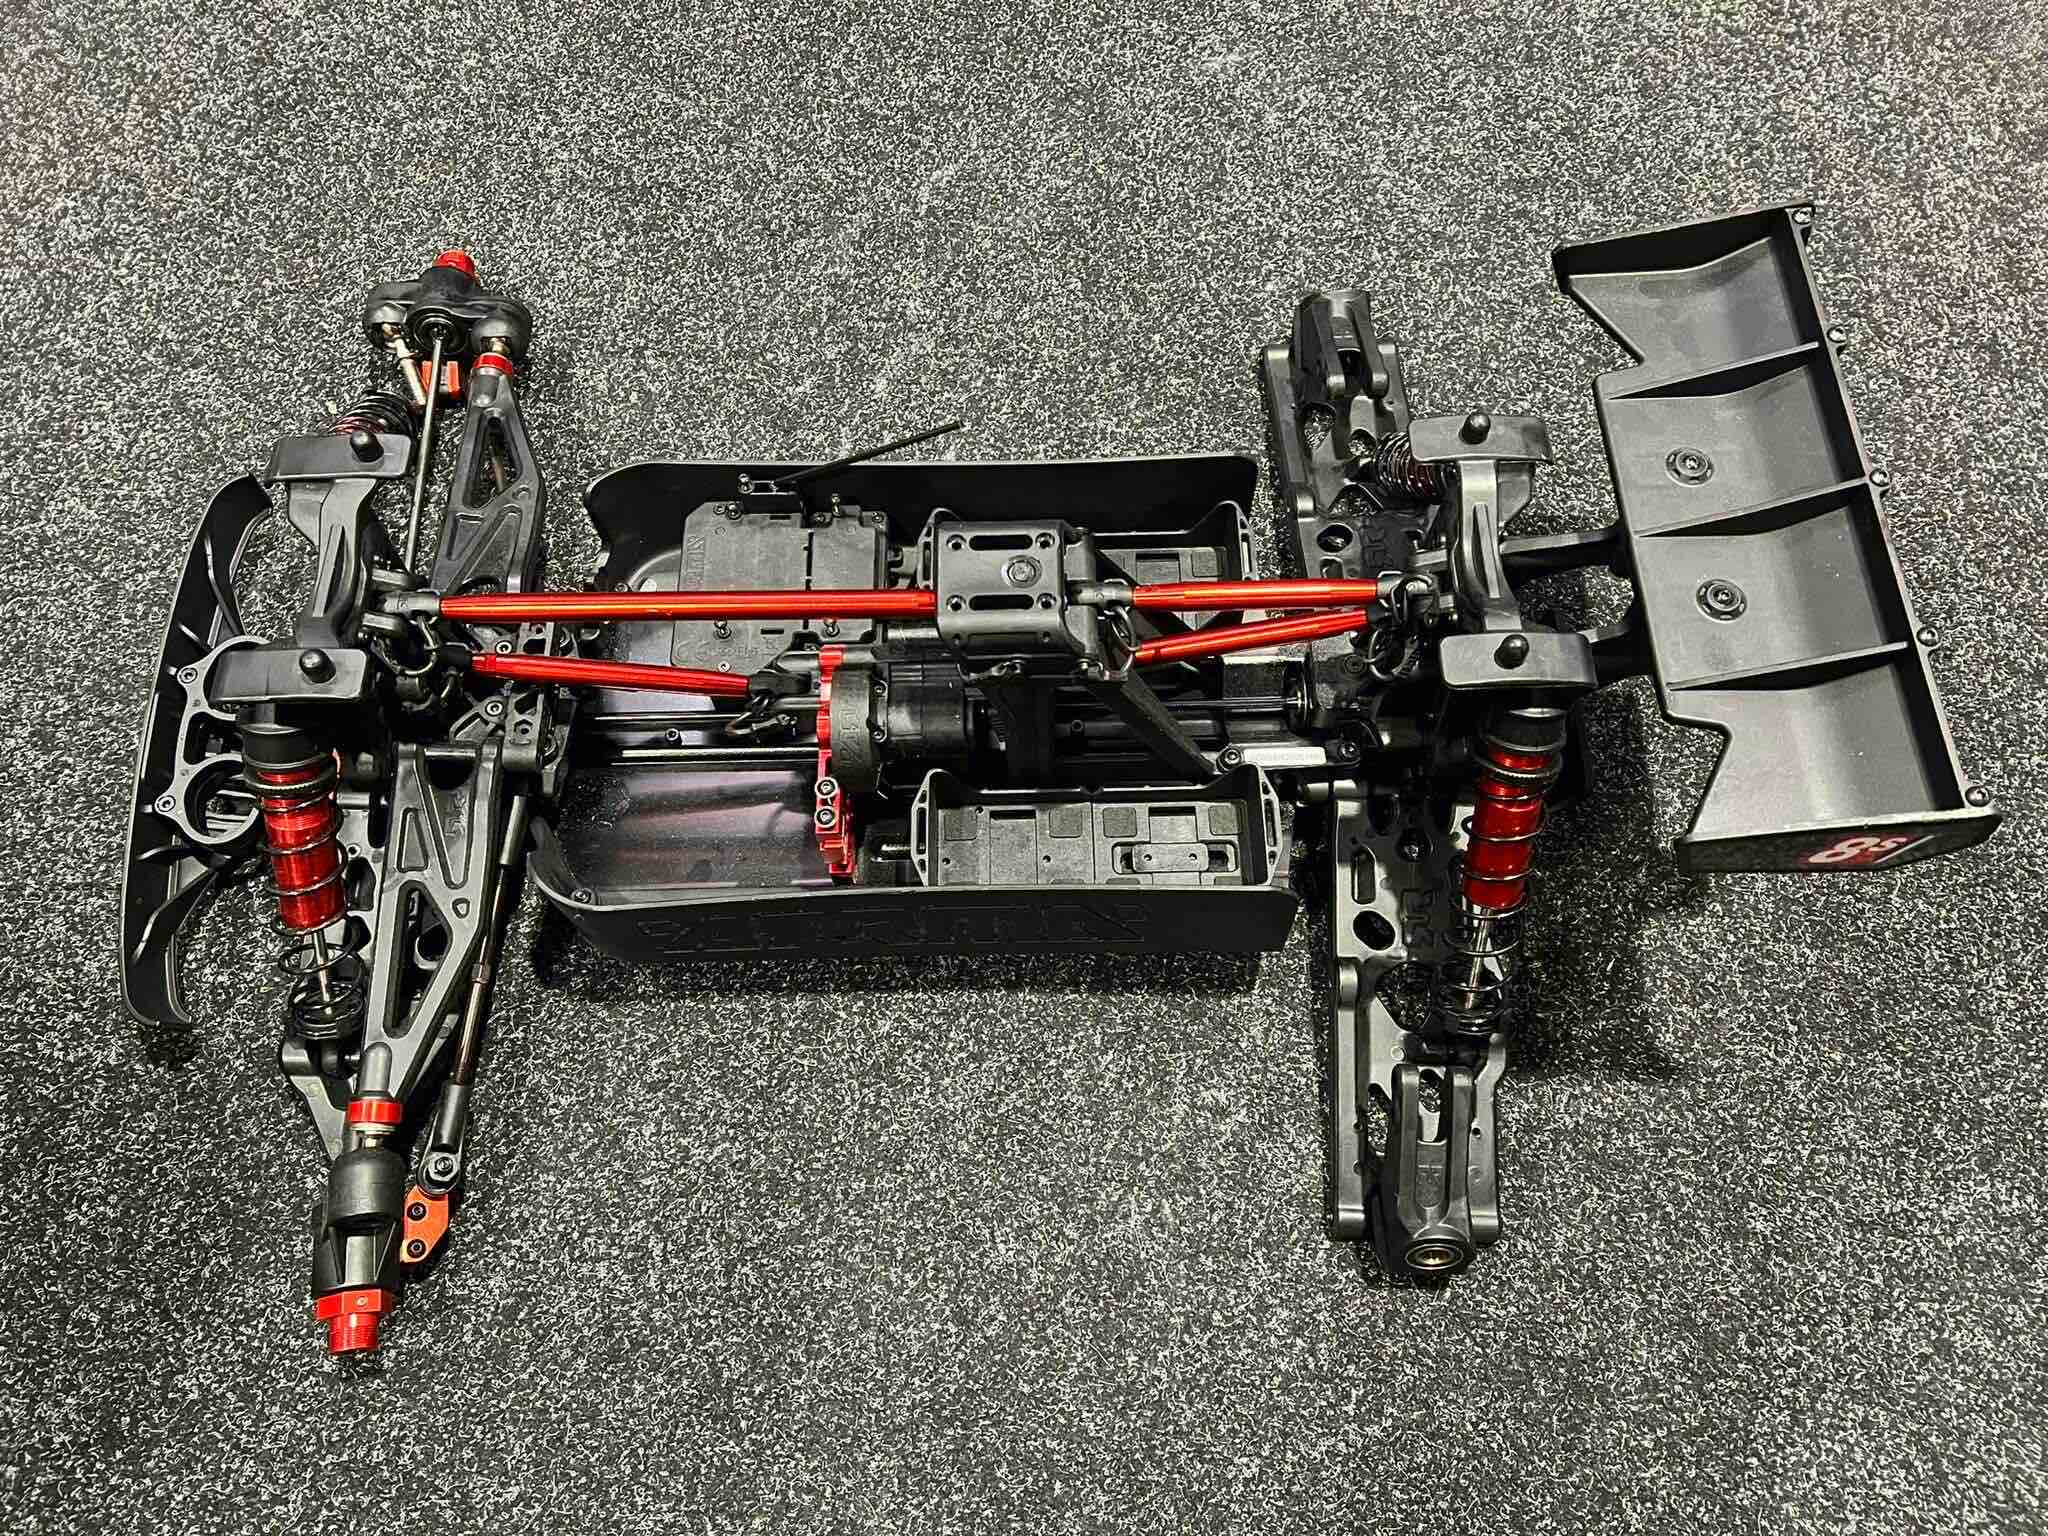 ARRMA Outcast 8s 1/5 Chassis Inclusief Alle diffs! (Nieuw Donor)